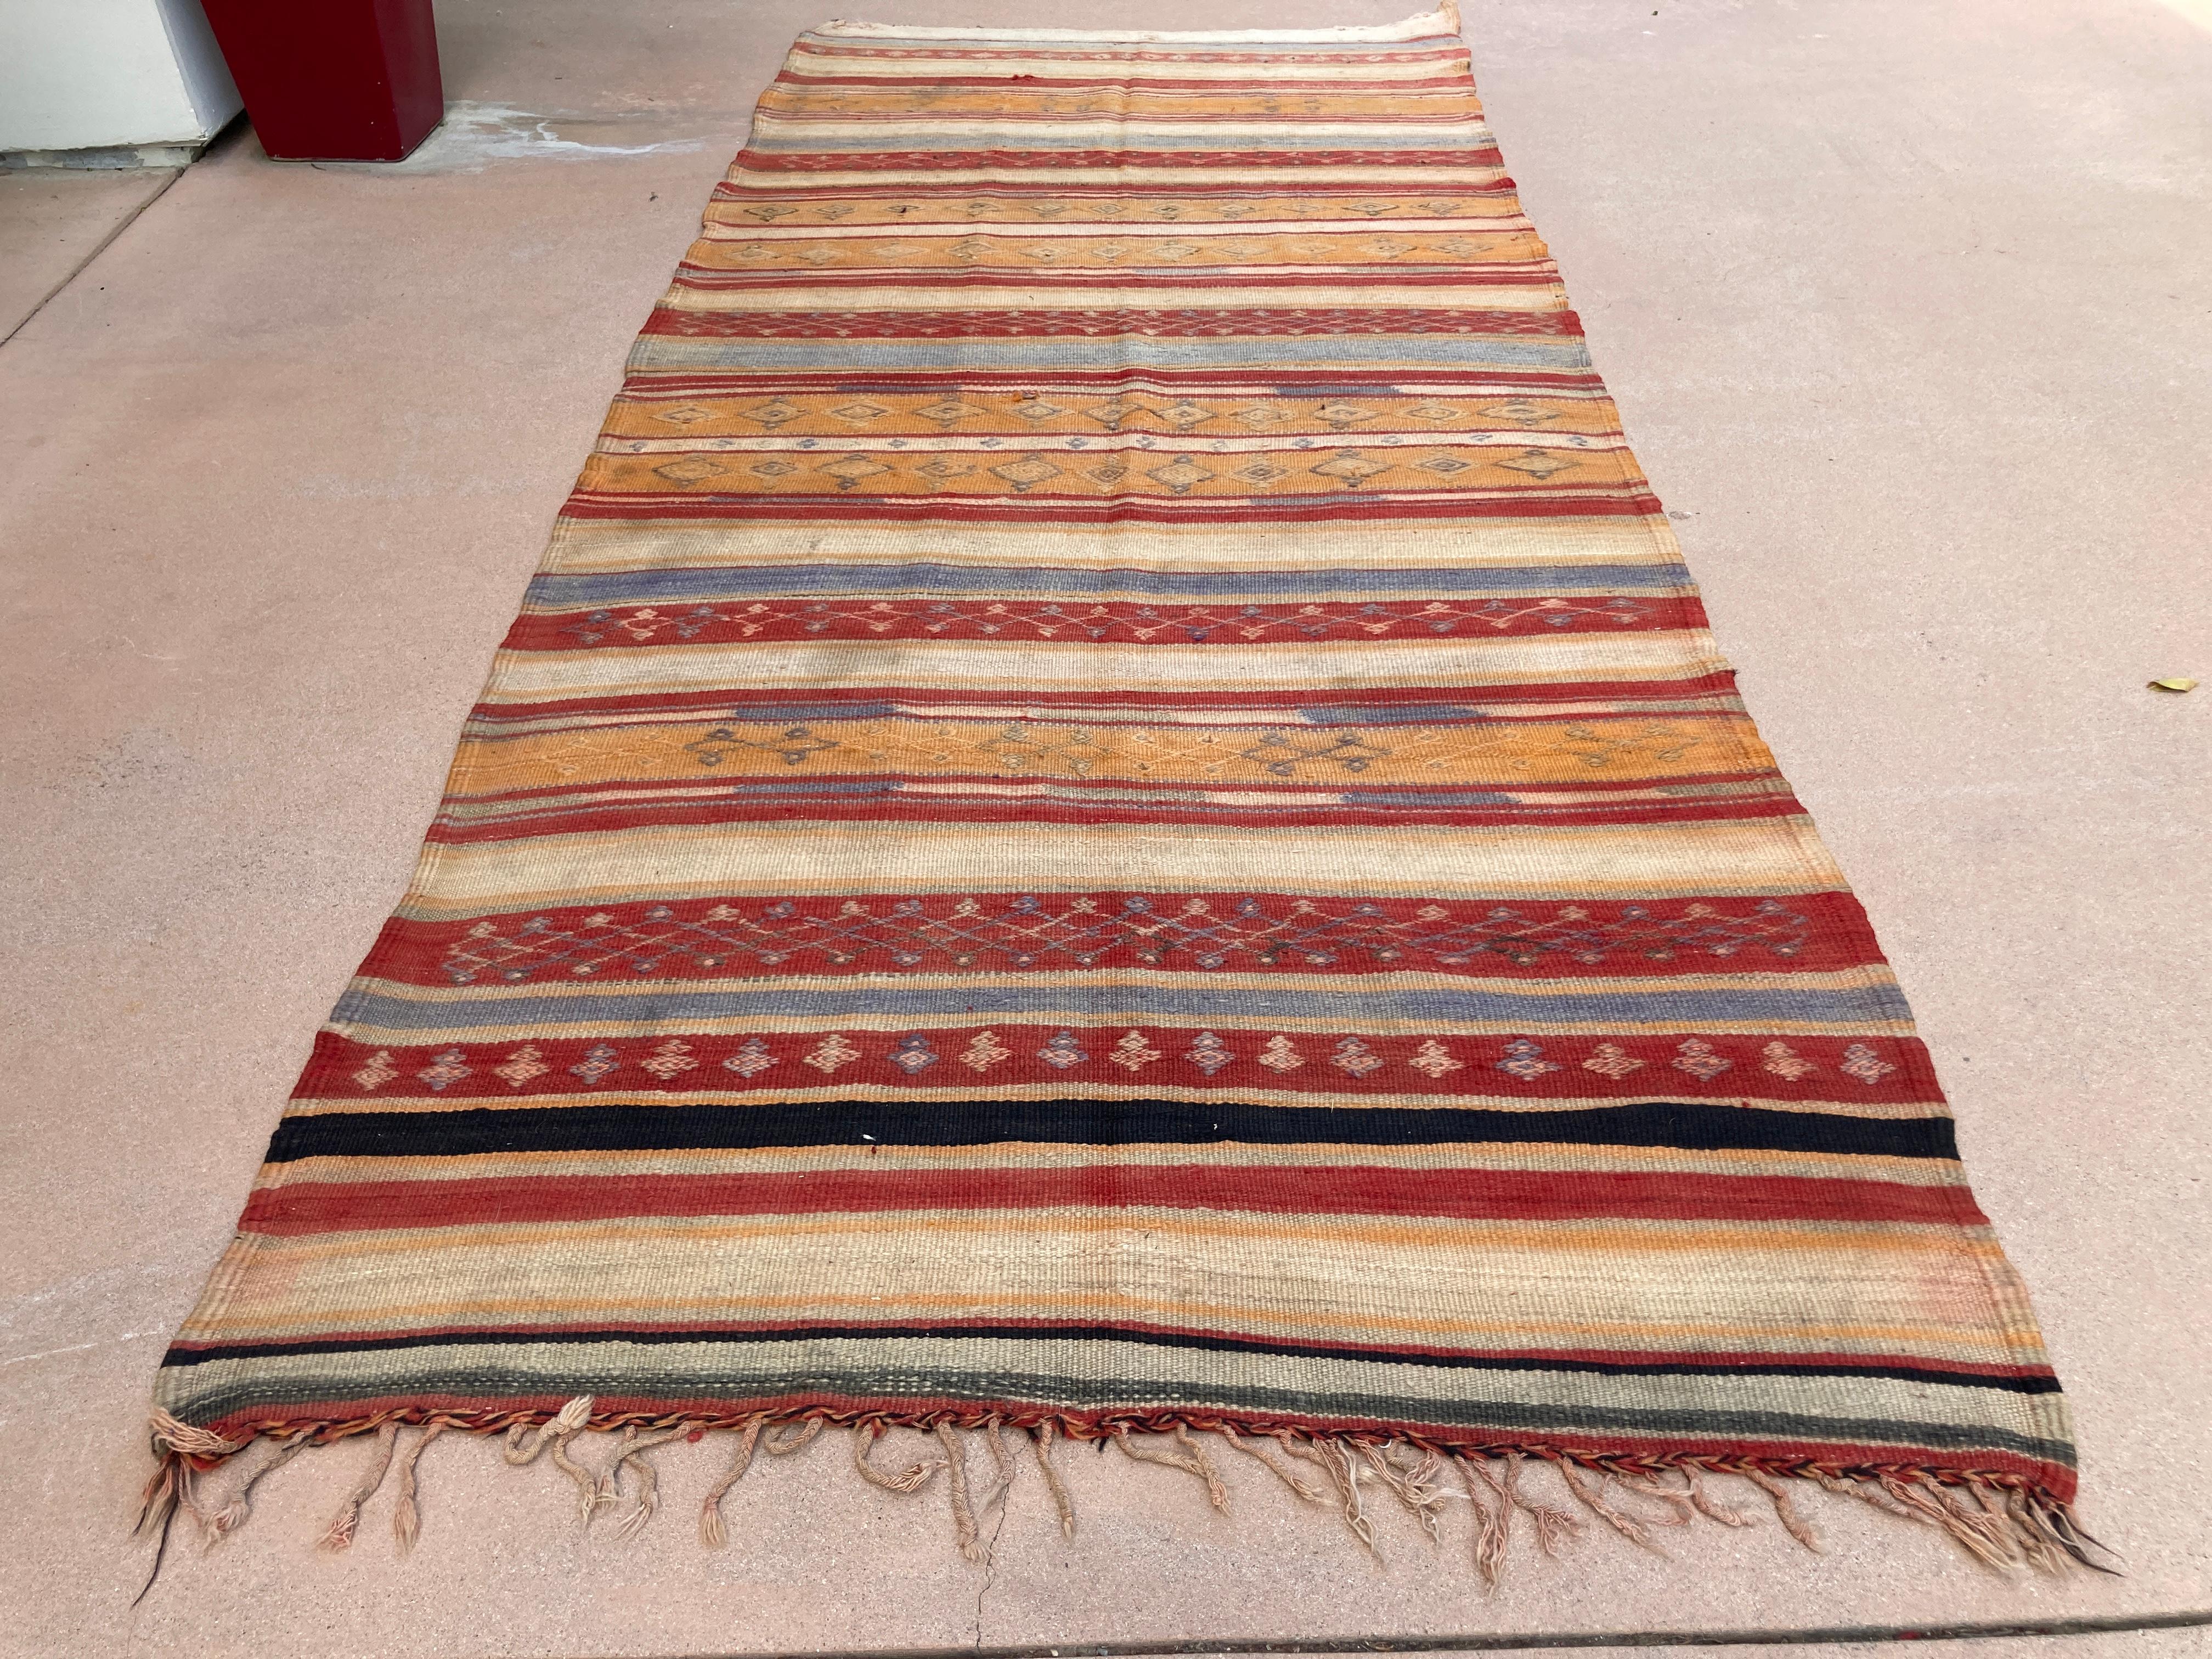 1960s Moroccan Rug Ethnic Flat Hand-woven Kilim 
Large handwoven vintage Moroccan Berber Tribal Kilim rug, nicely aged with muted colors.
Handwoven by the Berber tribes in south Morocco with traditional geometric tribal designs.
South of Marrakech